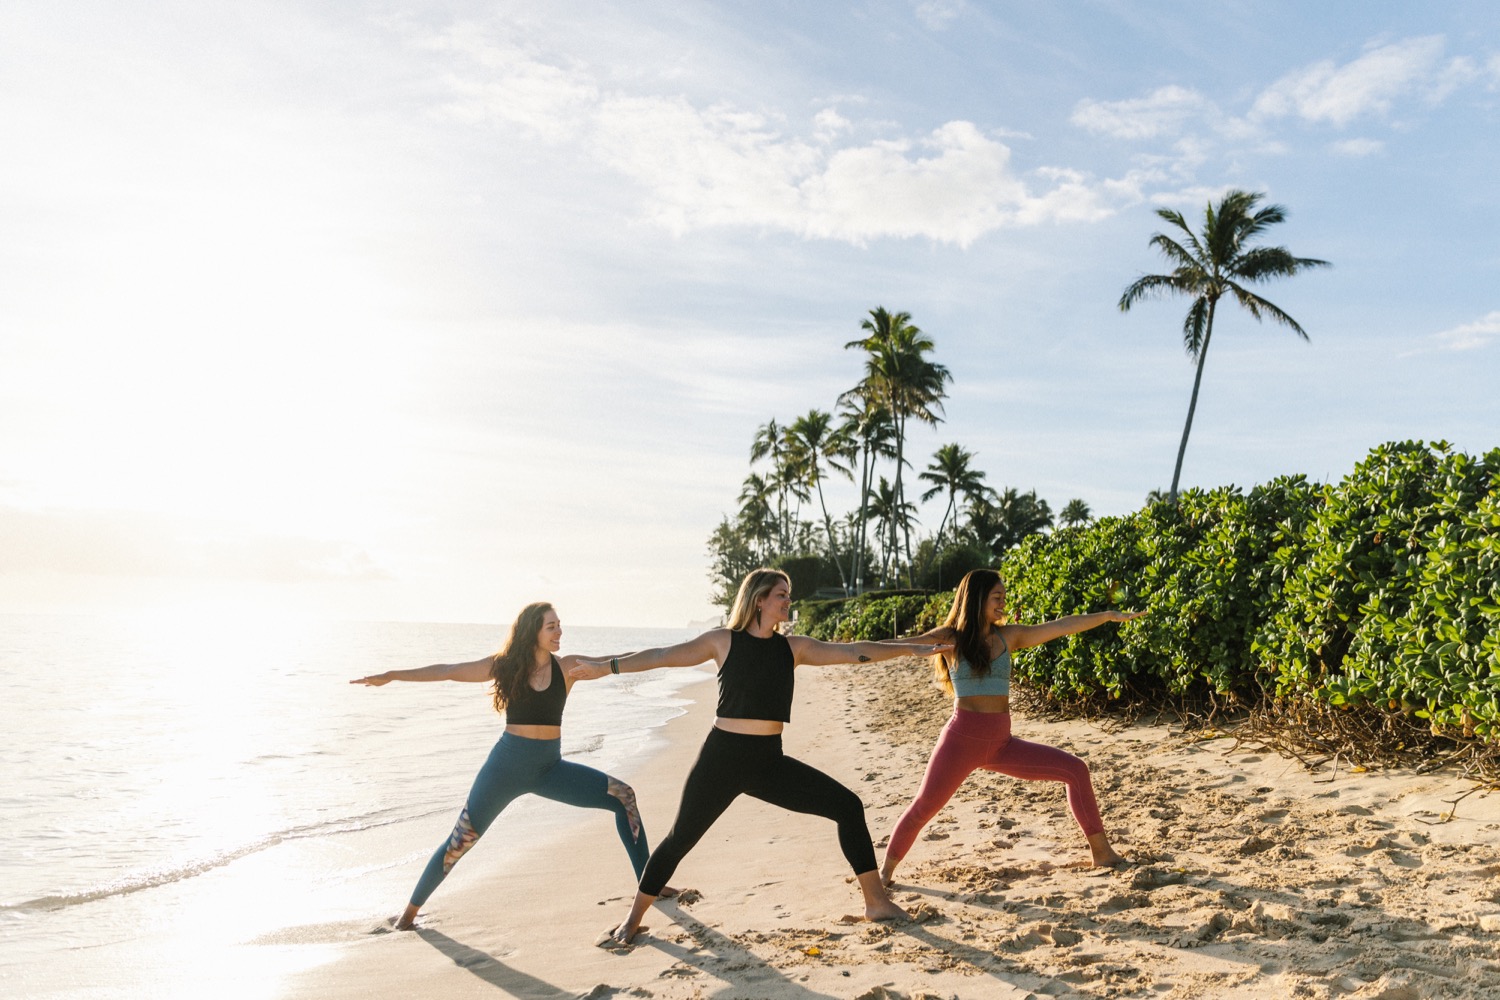 Alo Yoga- “FOR SUNRISE STROLLS OR POST-YOGA FLOWS”, Gallery posted by  hannah rose